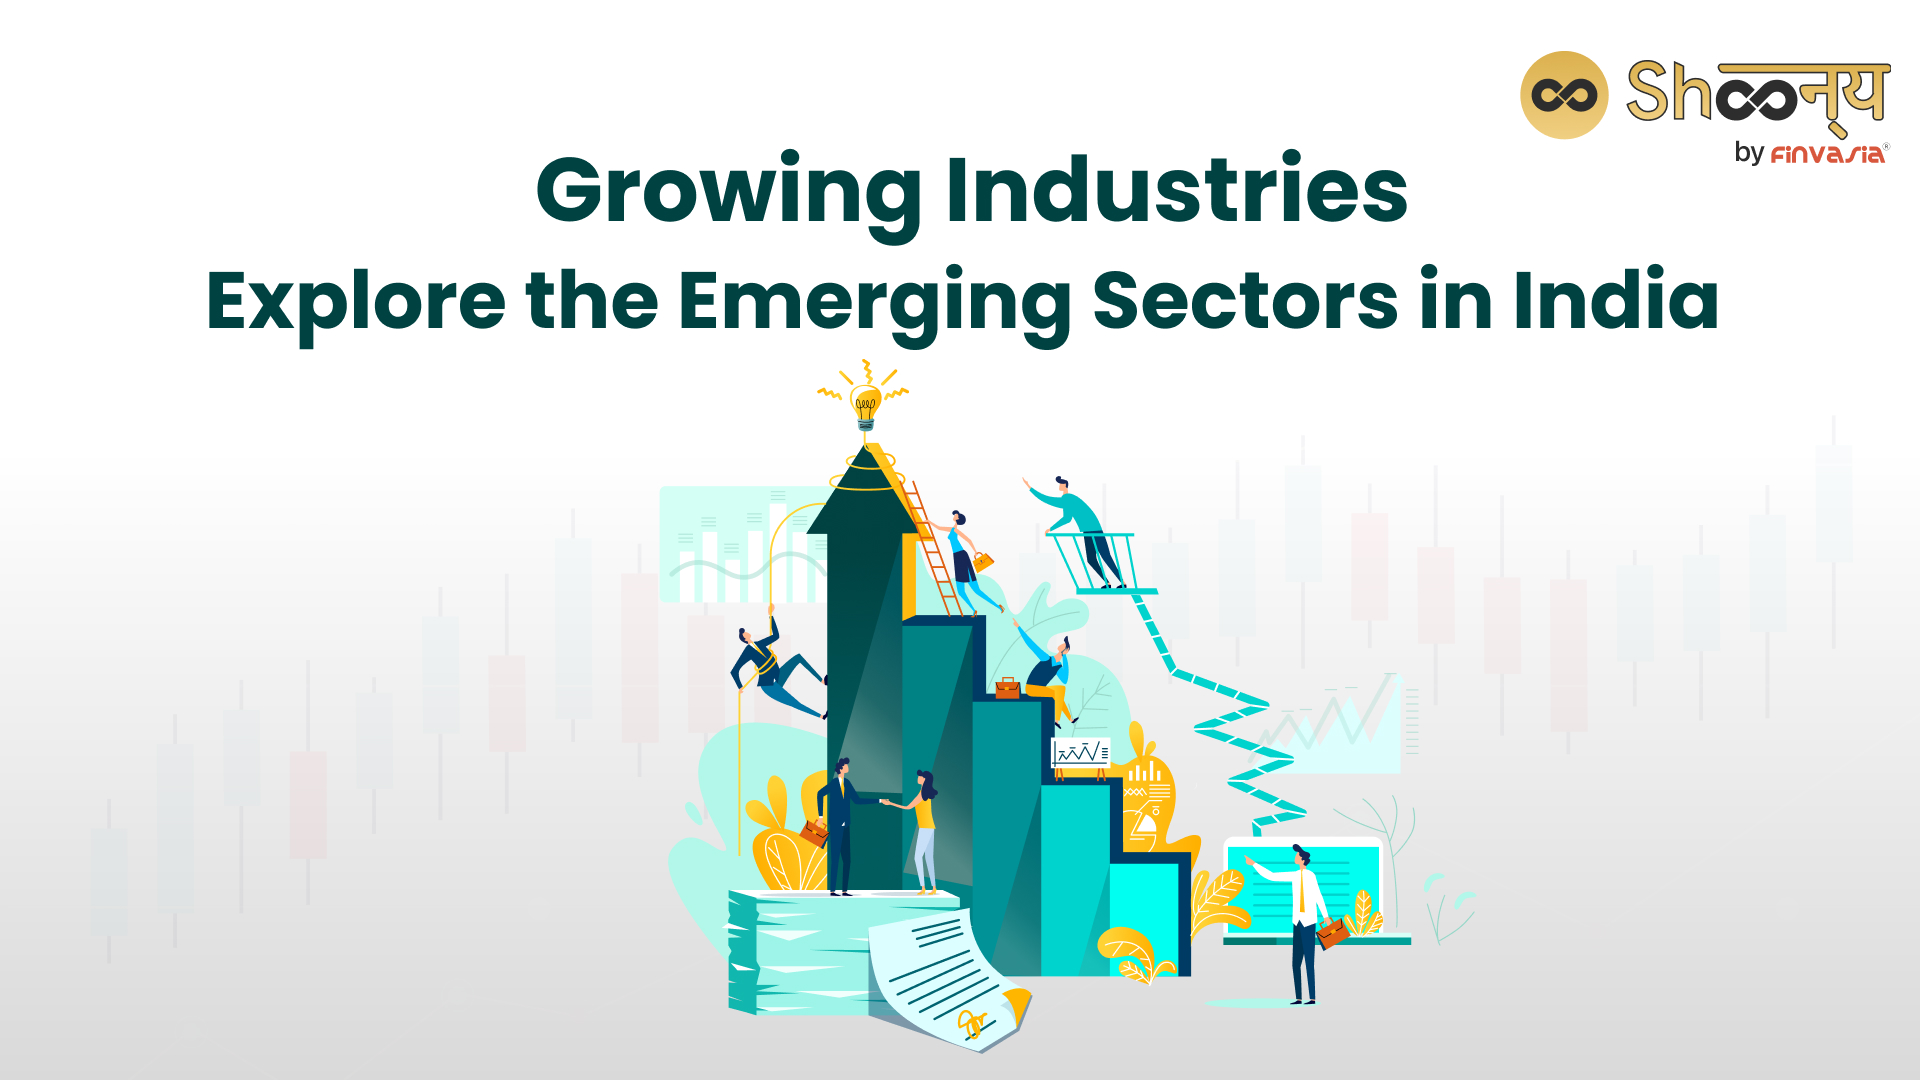 Growing Industries in India: An Overview